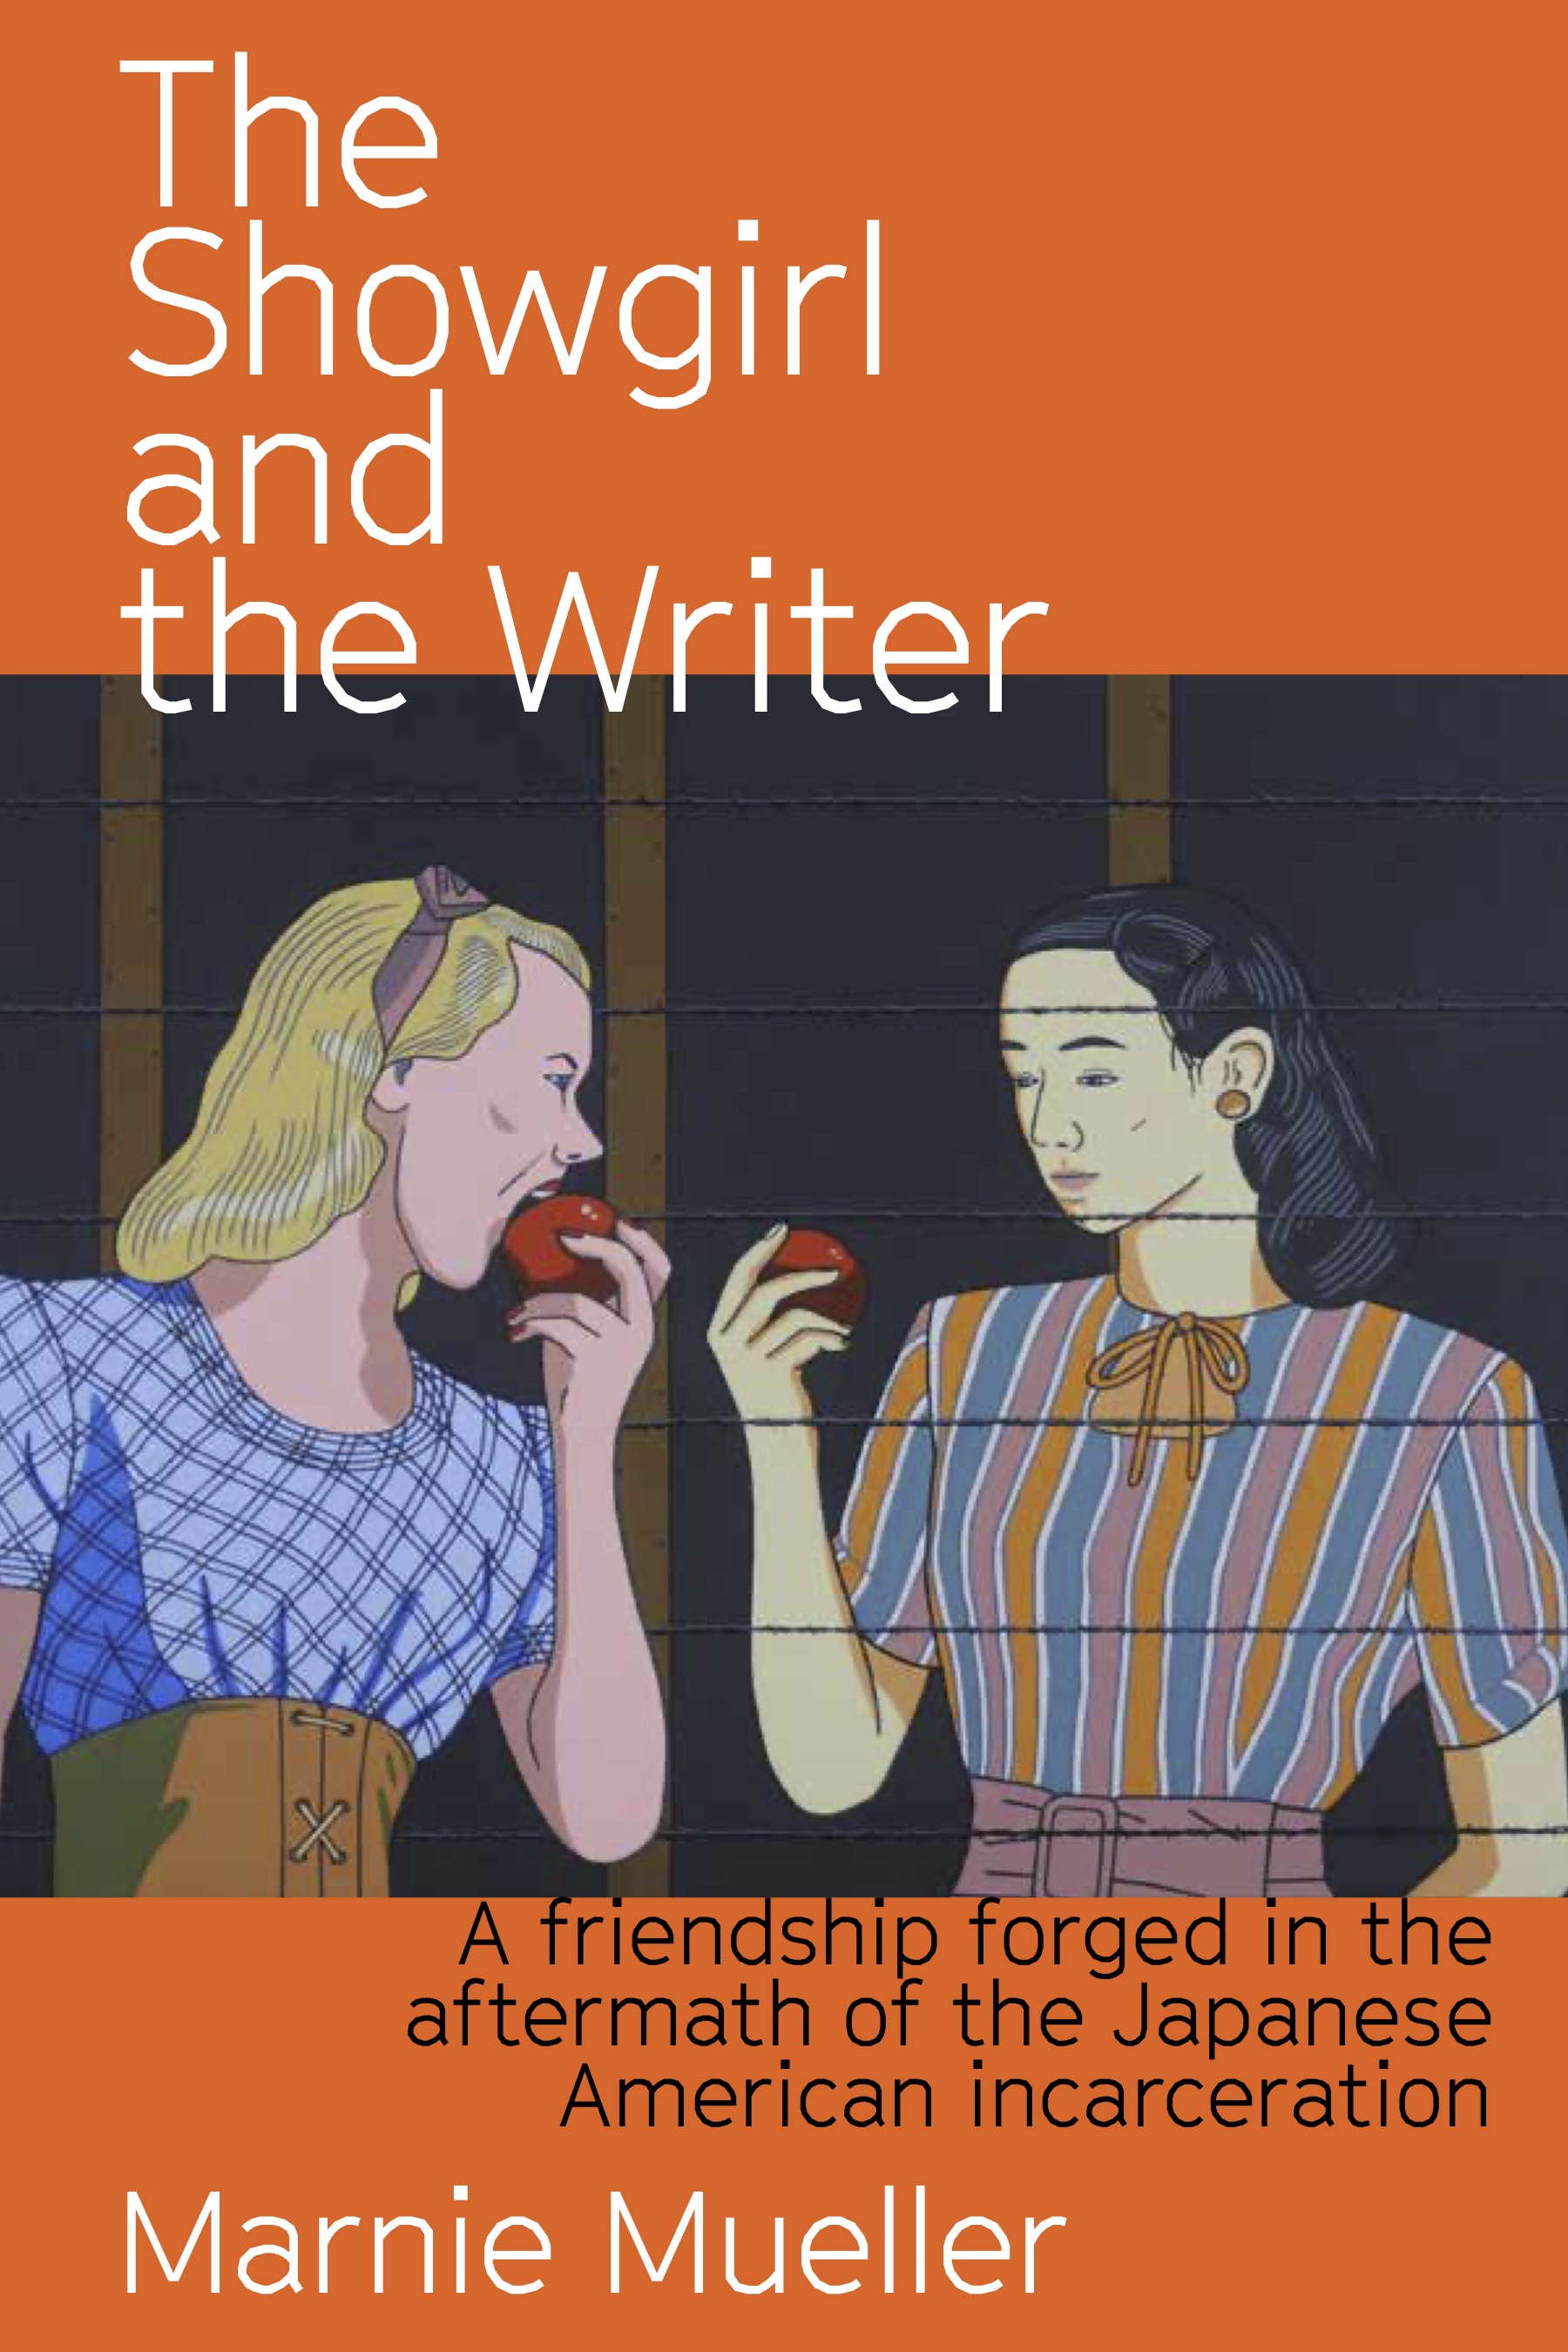 "The Showgirl and the Writer" by Marnie Mueller